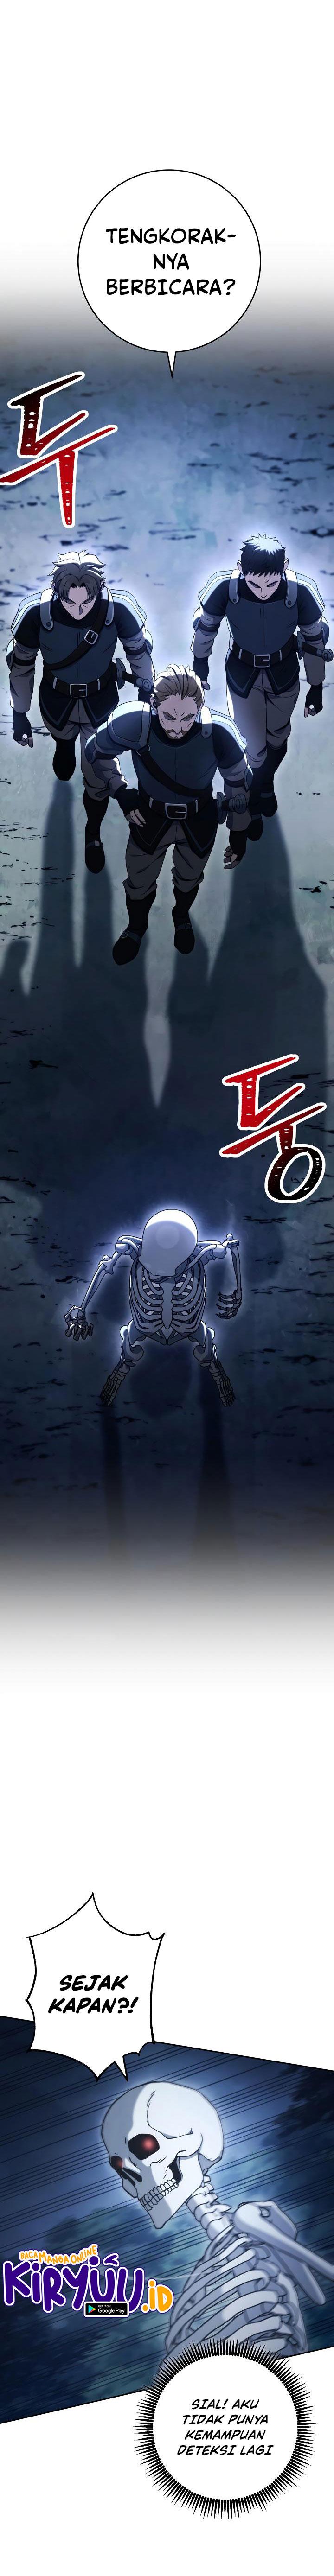 Skeleton Soldier Couldn’t Protect the Dungeon Chapter 201